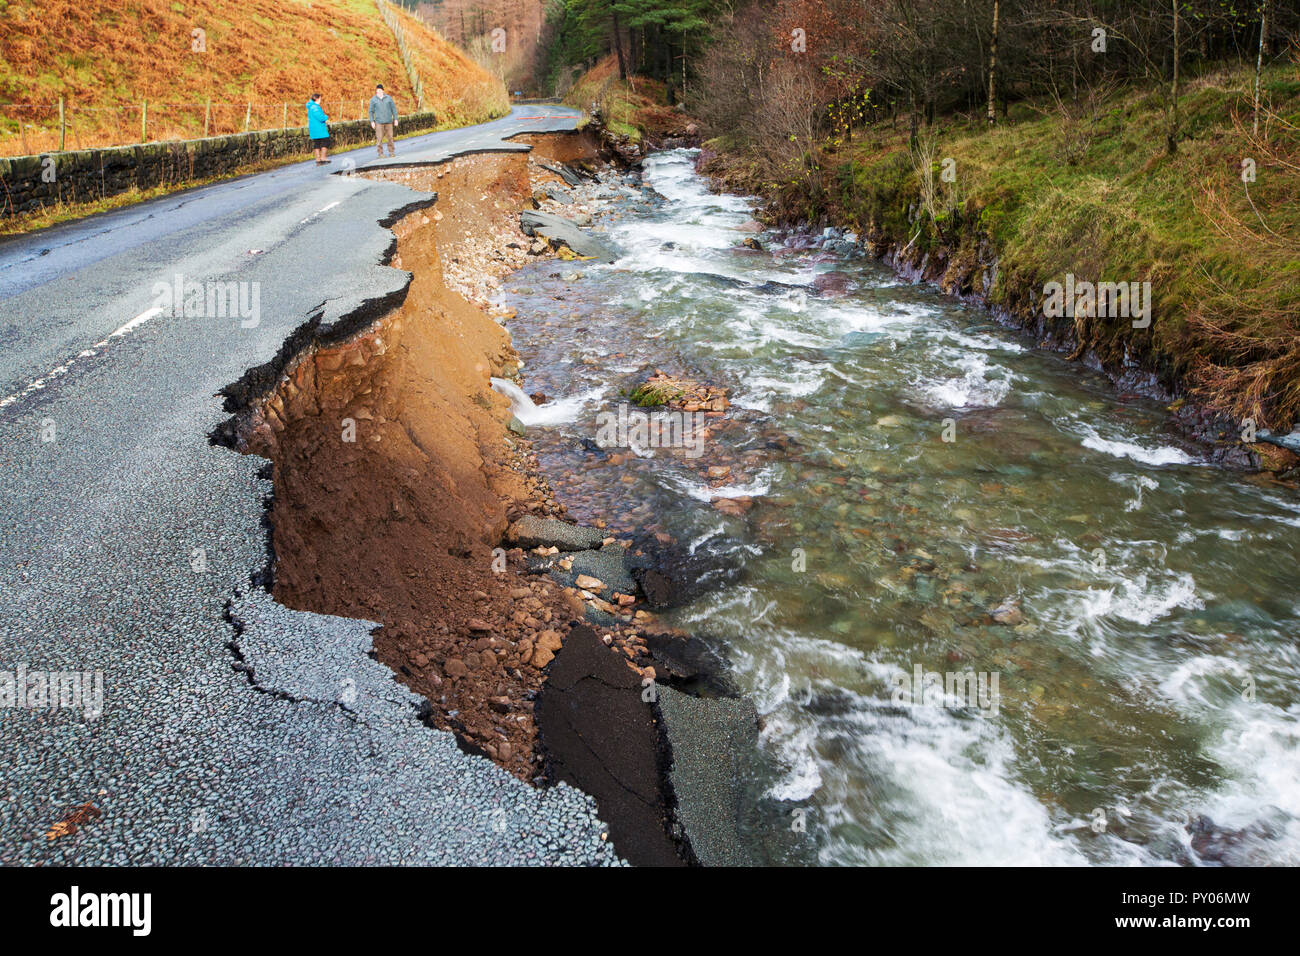 The A591, the main road through the Lake District, completely destroyed by the floods from Storm Desmond, Cumbria, UK. The road was breached in several places by landslides and walls of flood debris twenty feet high. the road will probably be closed for months. Taken on Sunday 6th December 2015. Stock Photo